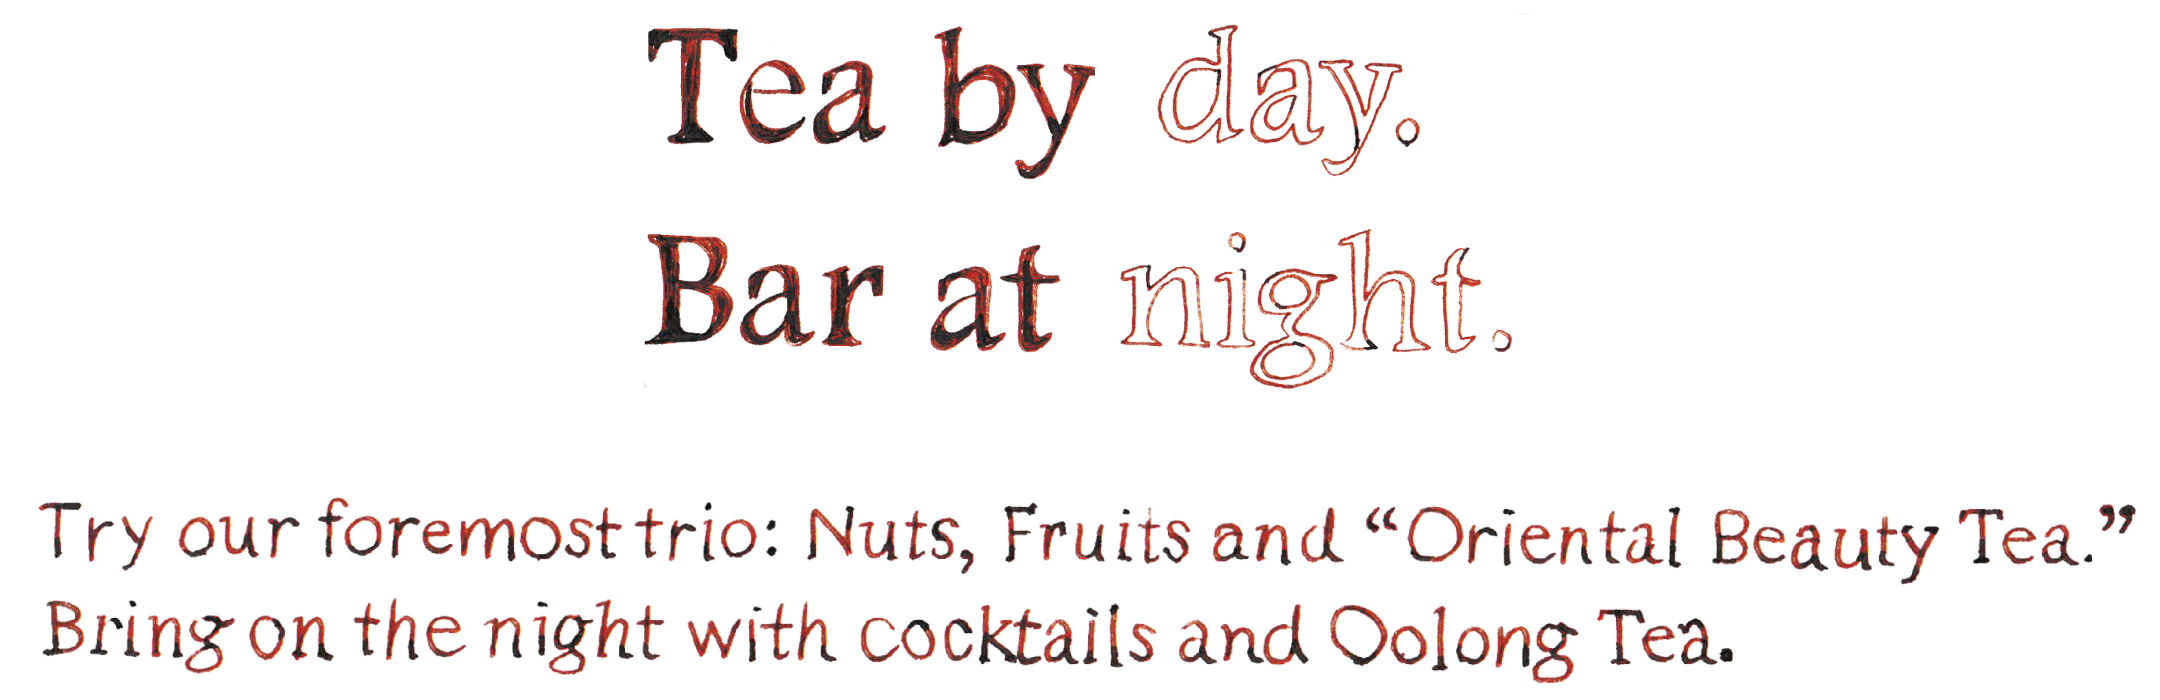 Tea by day. Bar at night. Try our for most trio: Fruits and Oriental beauty Tea. Bring on the night with cooktails and Oolong Tea.